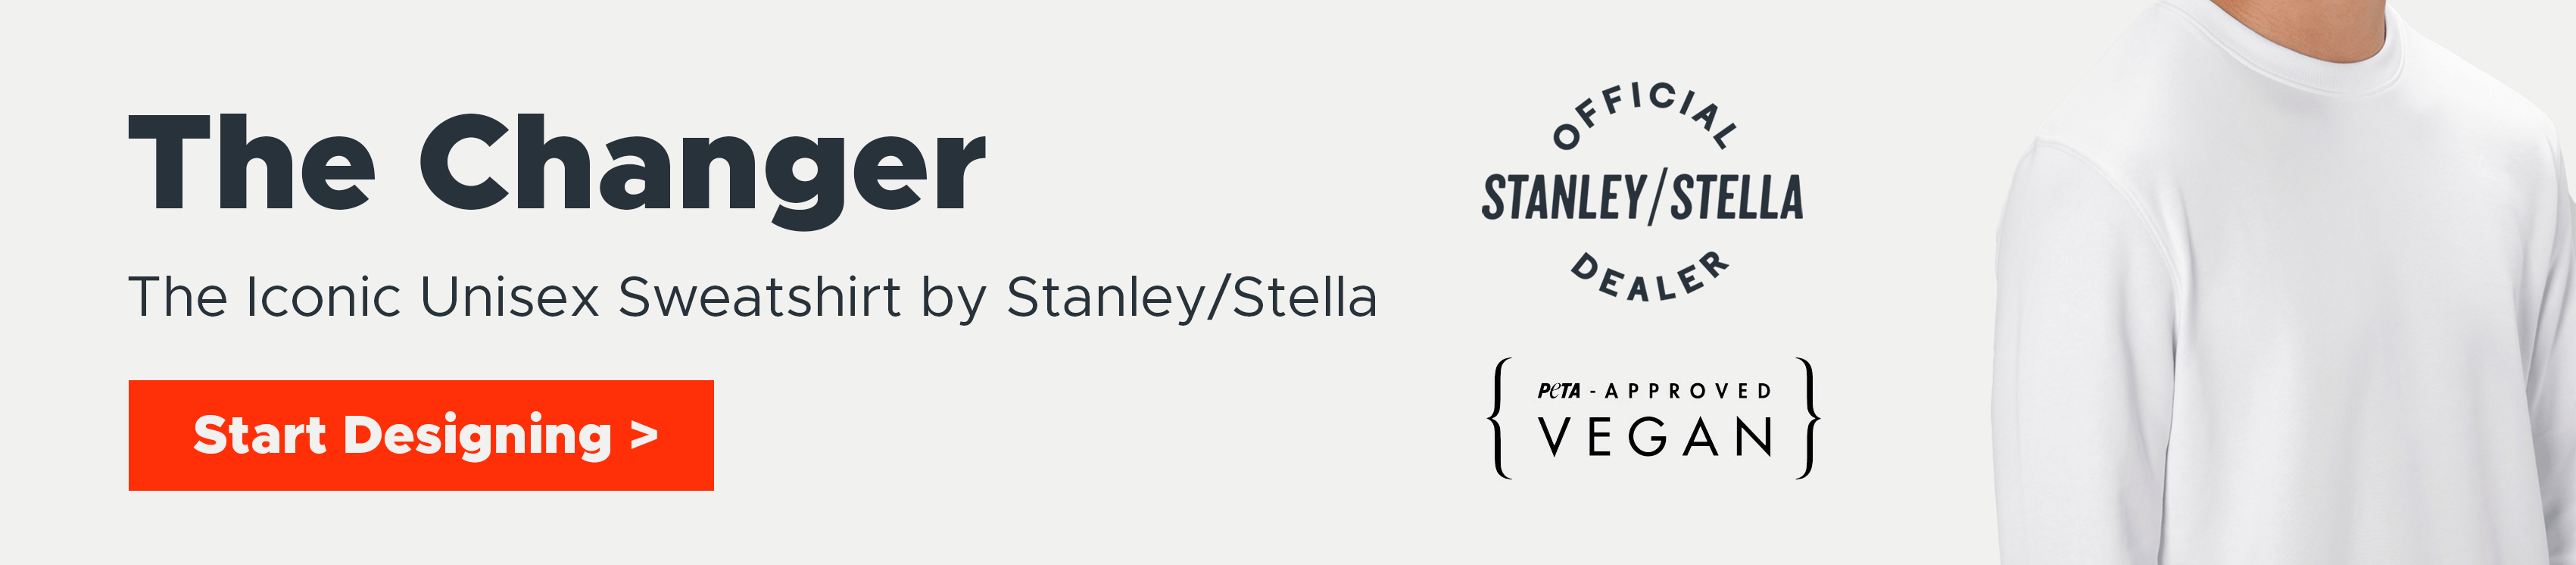 The Changer by Stanley Stella